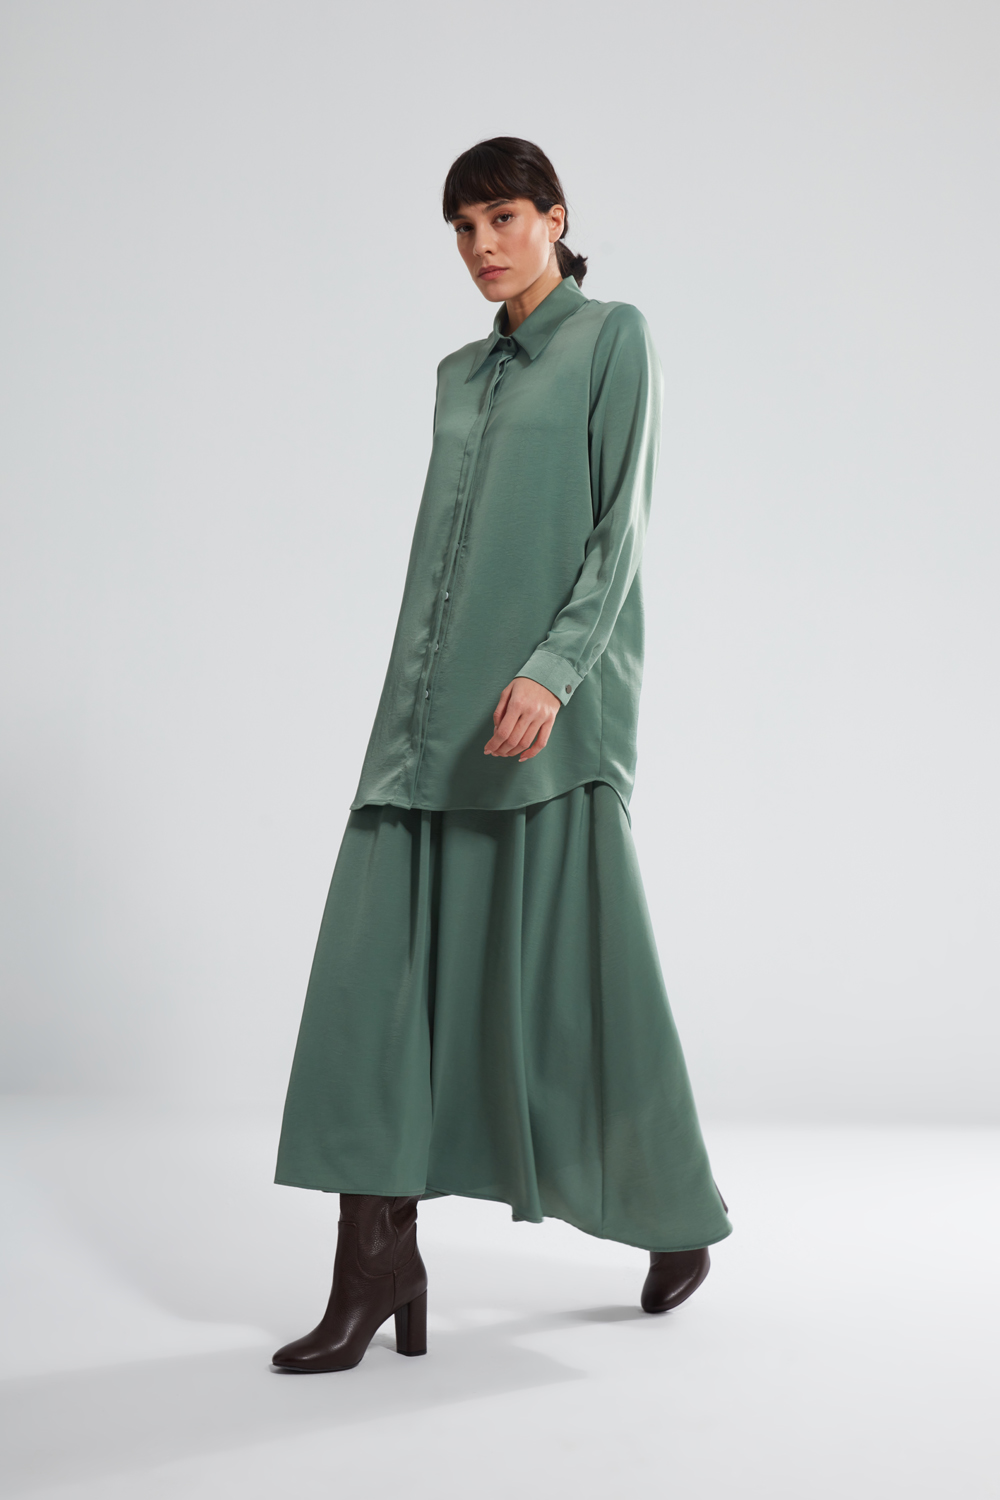 Pop Mint Shirt with Concealed Pointed Collar